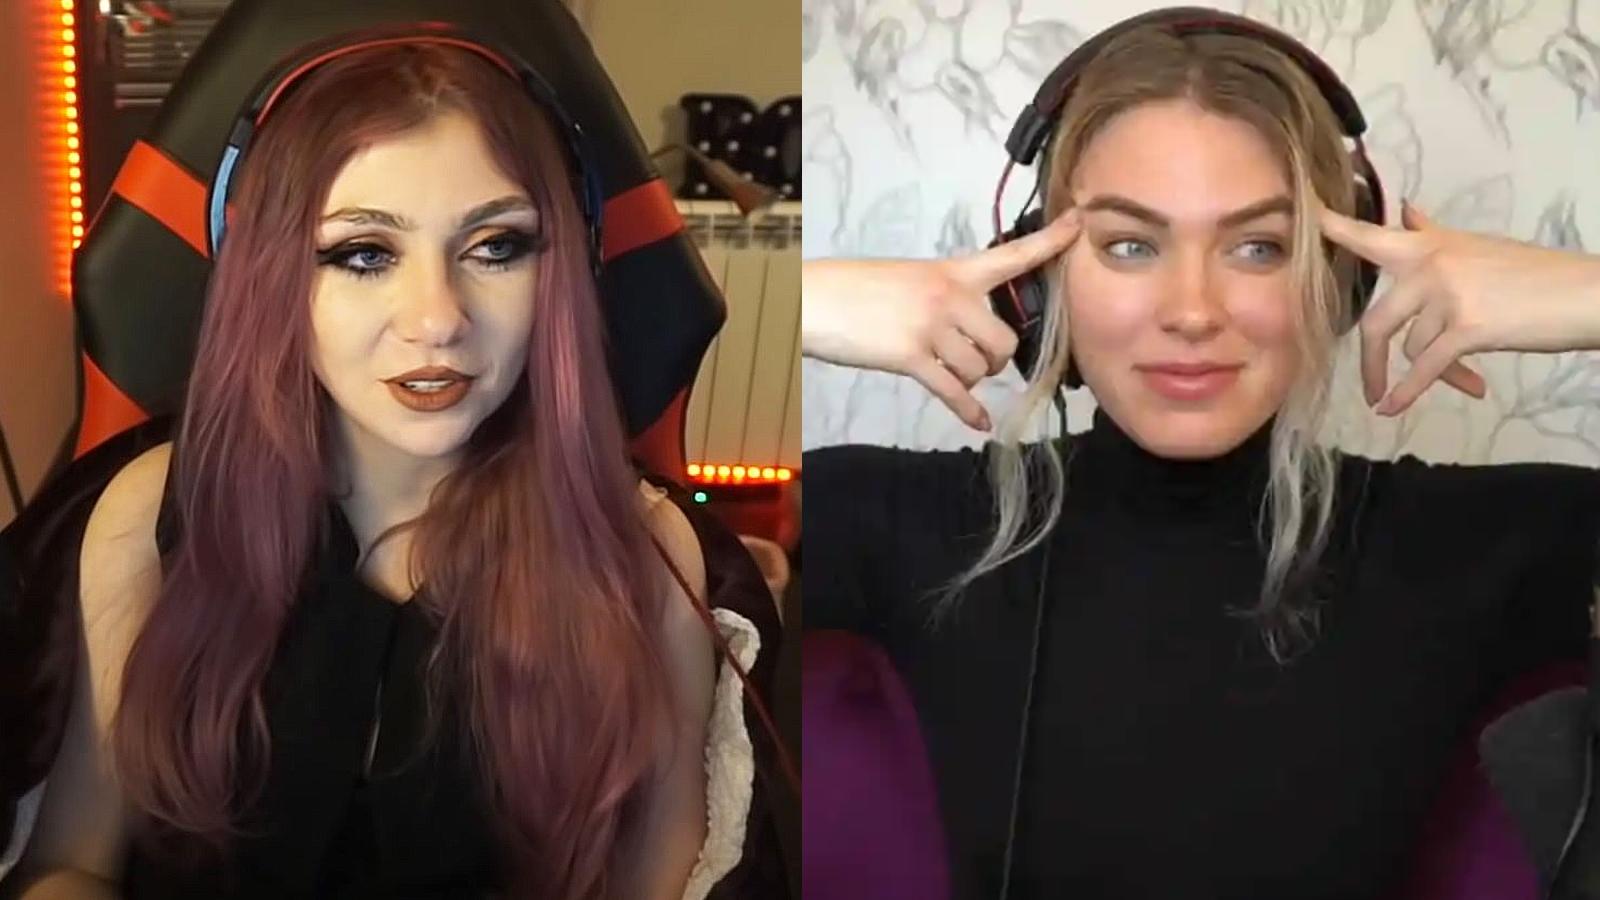 I Am No Longer Interested in Having Contact With This Person”- Says  QTCinderella on Her Relation With JustaMinx, Alleging Her to Have Caused  the 2023 Streamer Awards' After-Party to Shut Down 